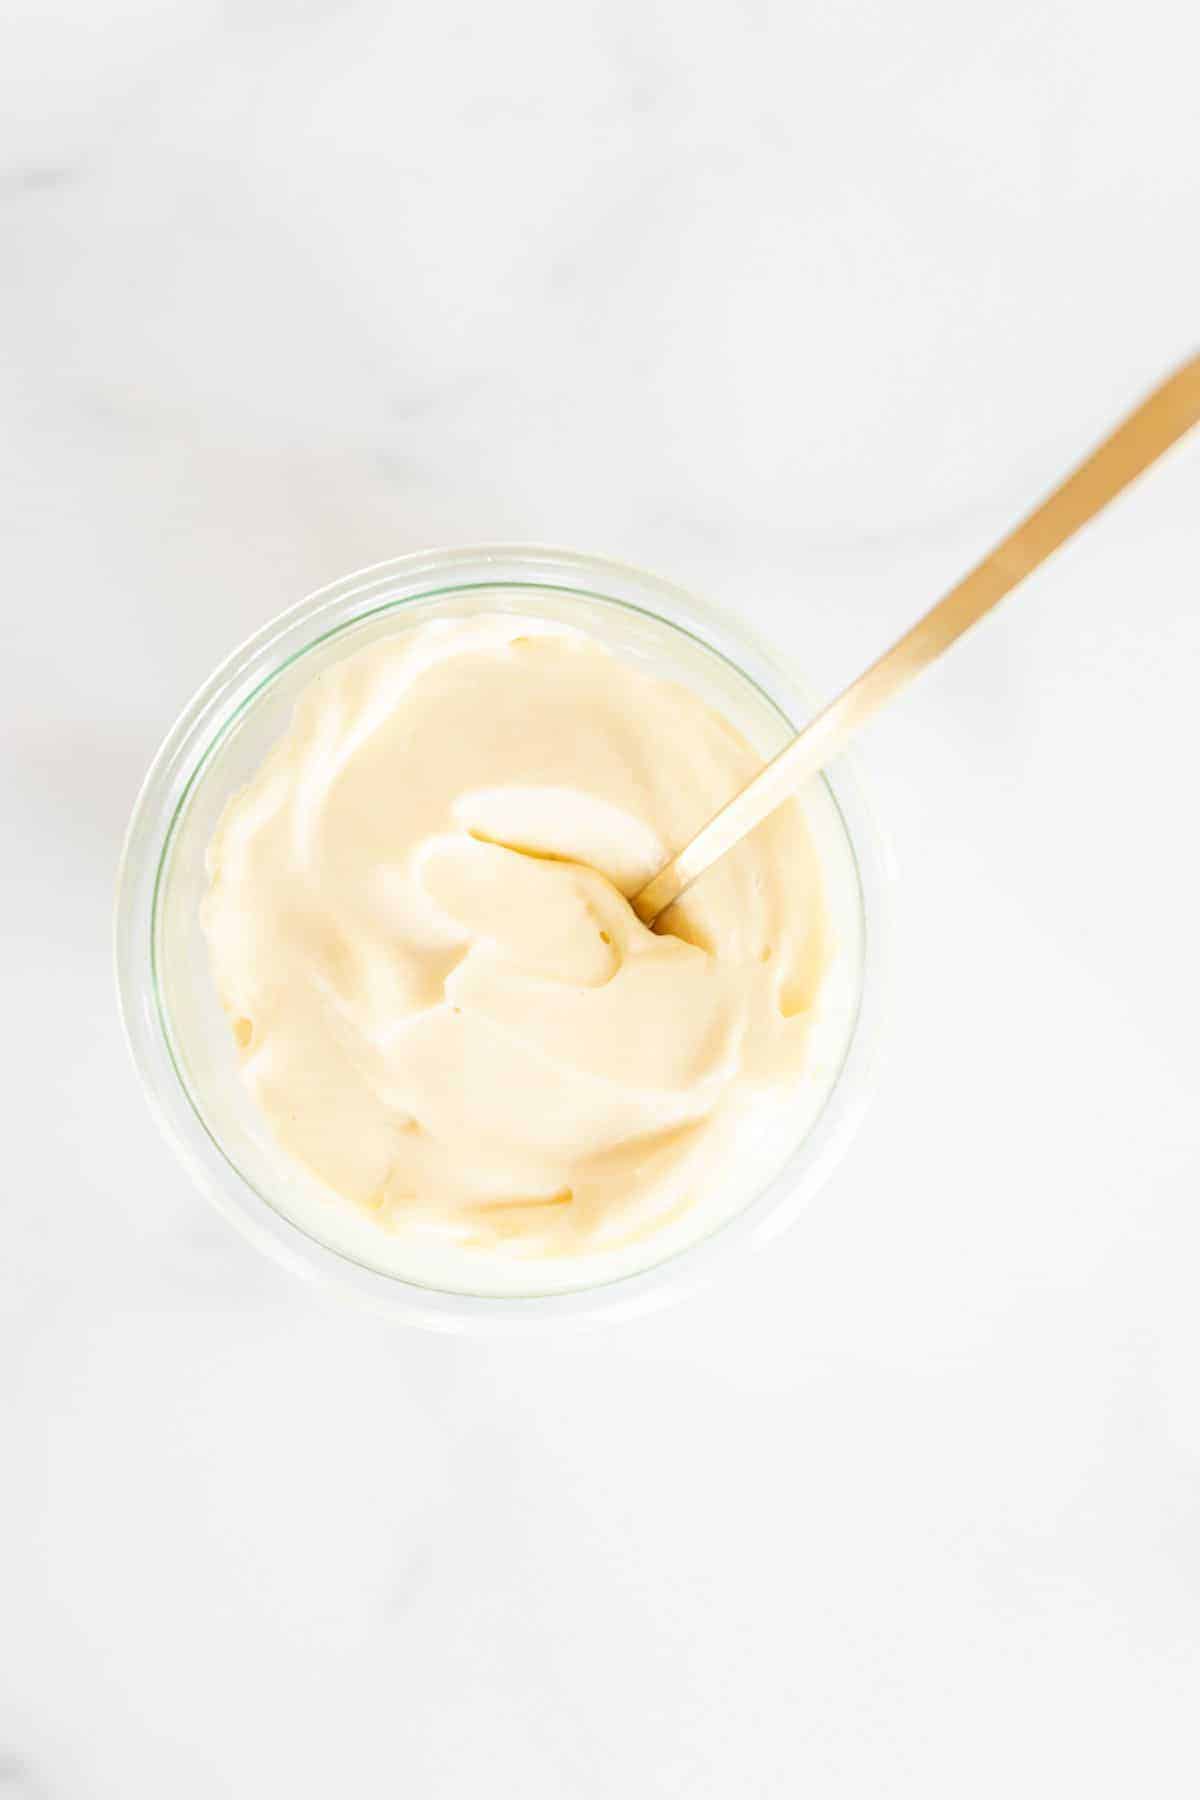 A clear glass container full of homemade mayonnaise, on a marble surface, gold spoon inside bowl.